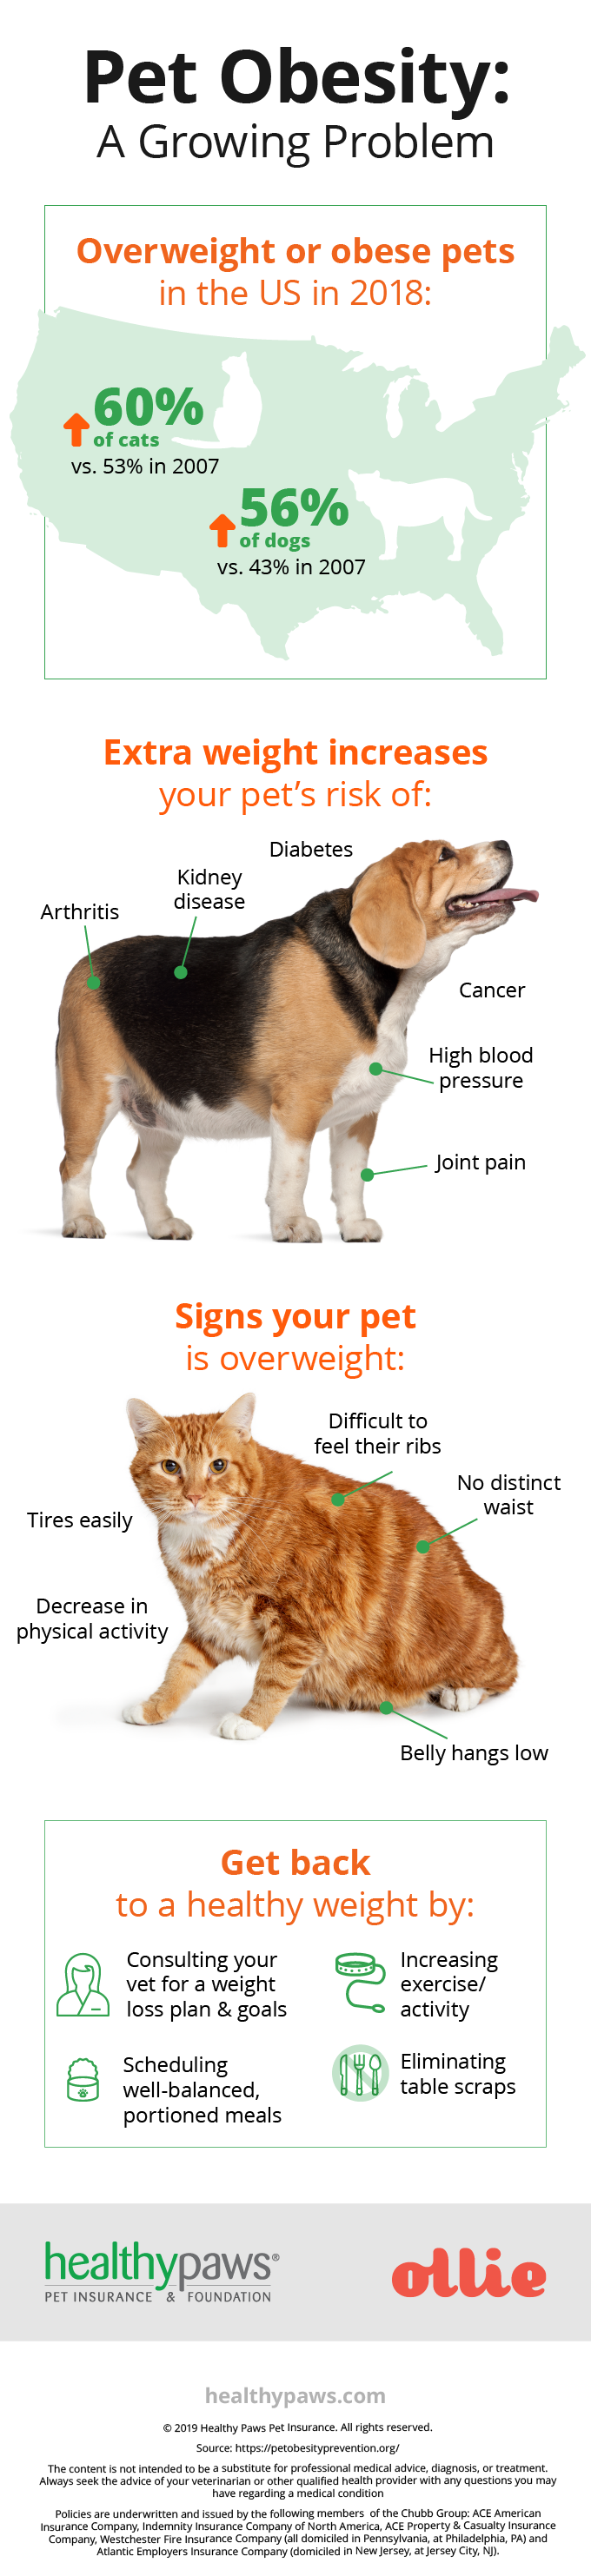 dog and cat obesity infrographic